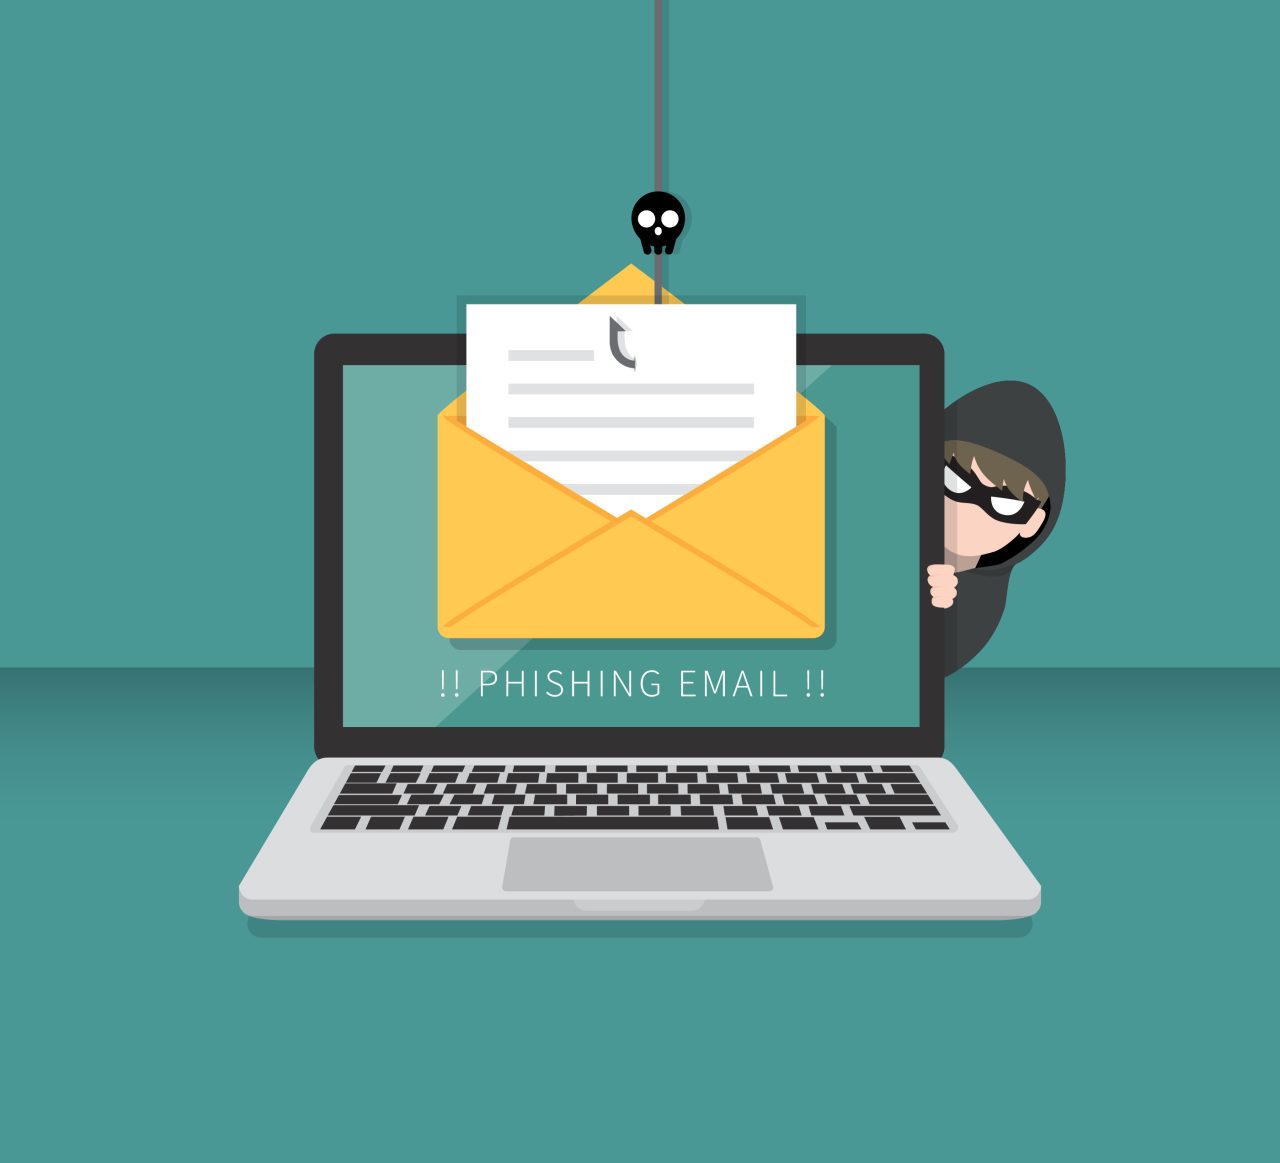 The importance of understanding phishing emails